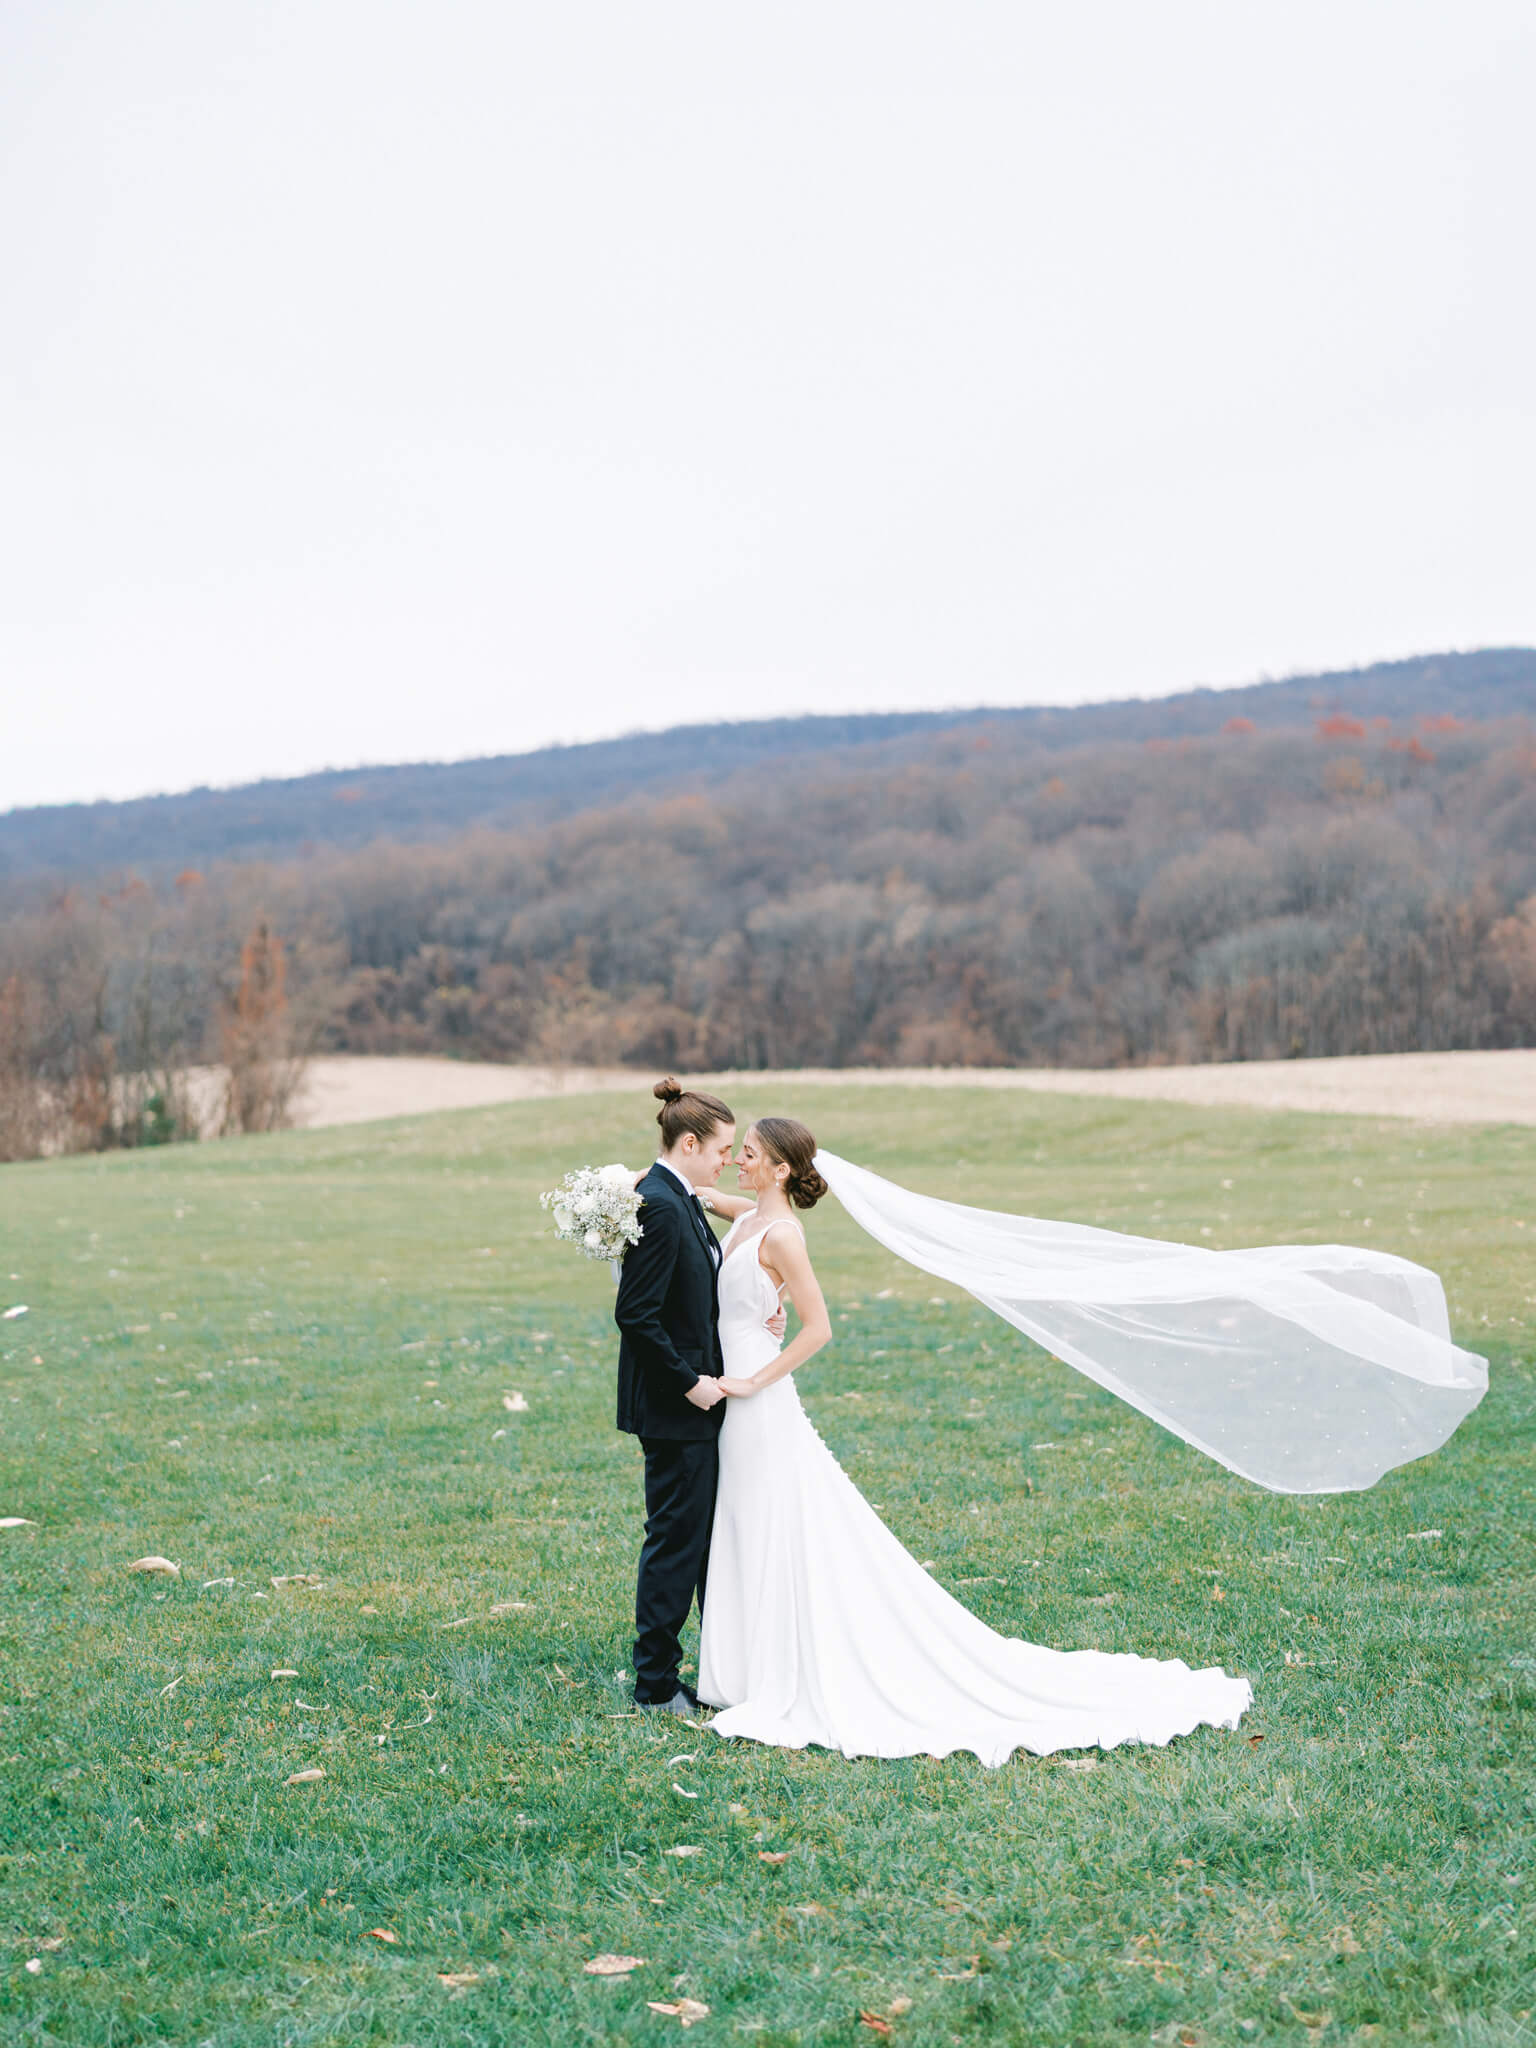 A groom holding his bride, while her veil floats in the breeze in front of mountain views.